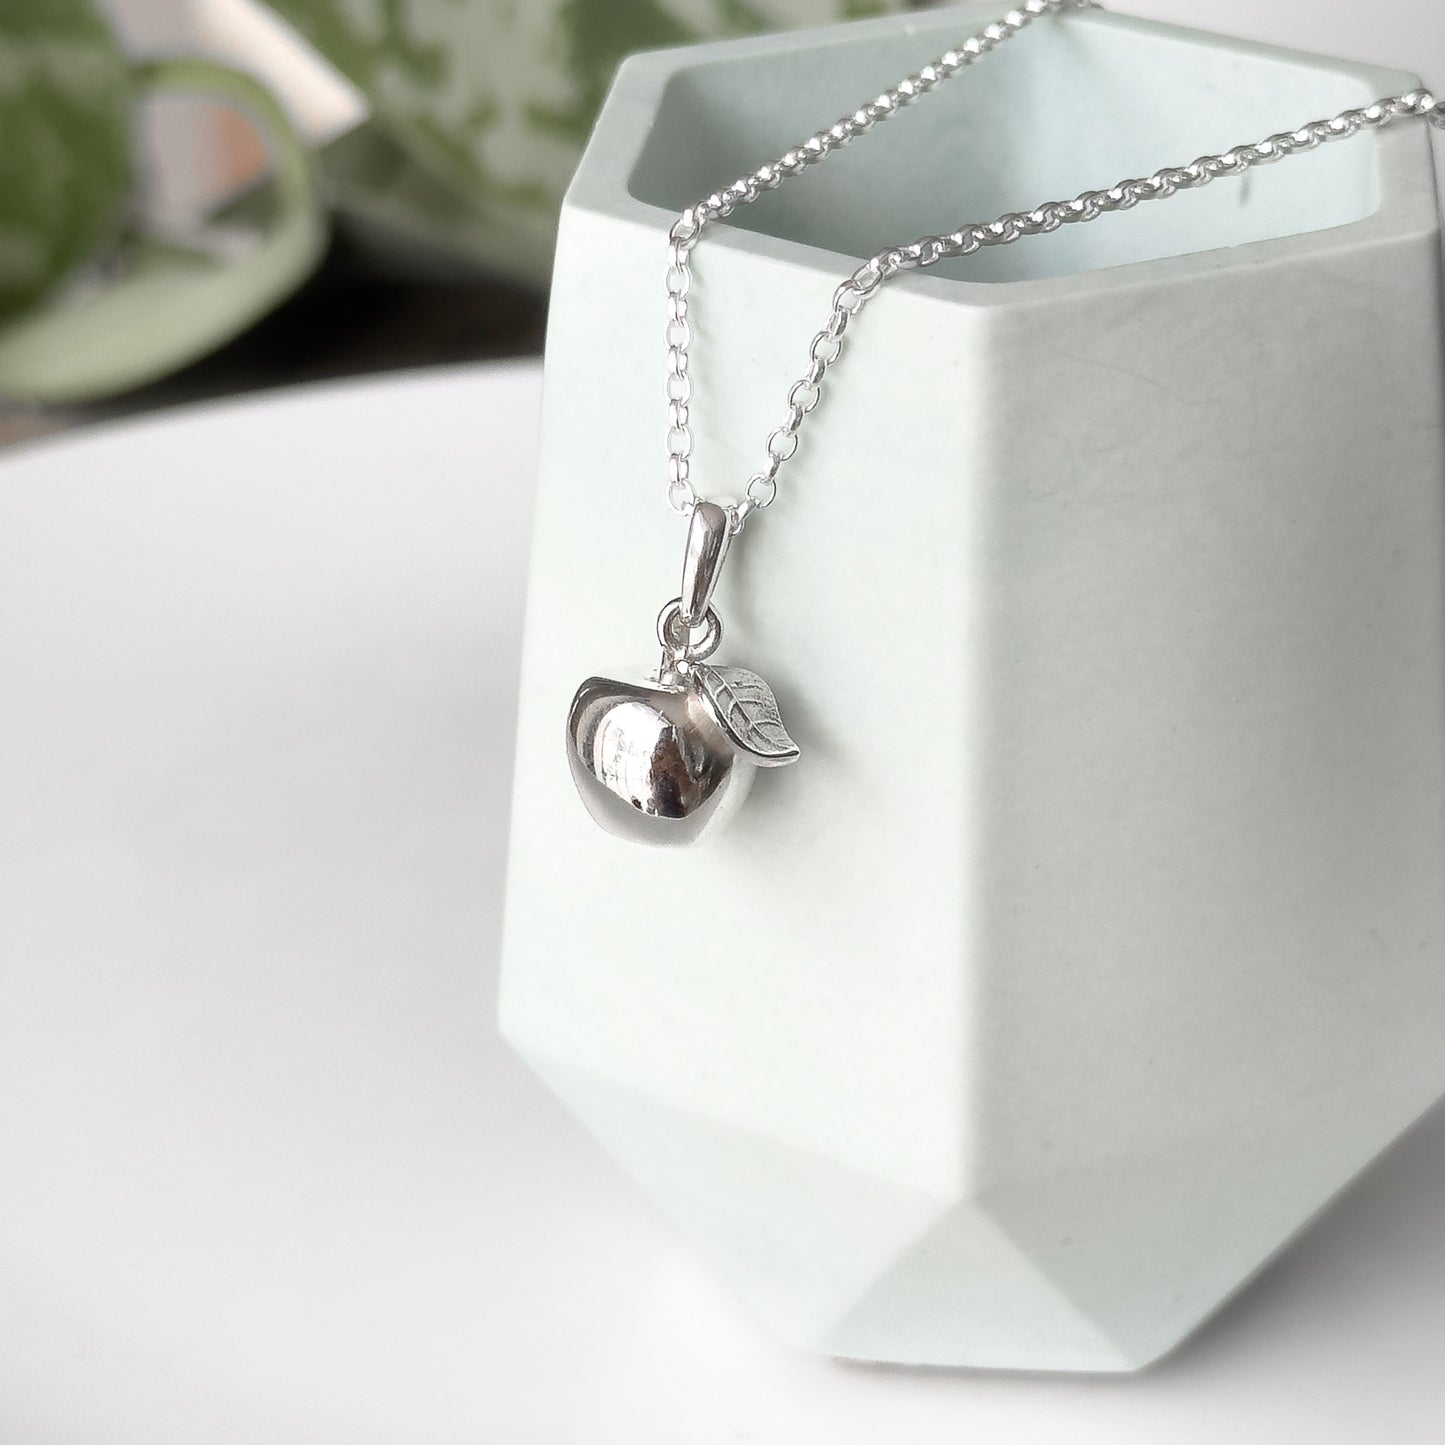 Solid Silver Apple Charm Necklace